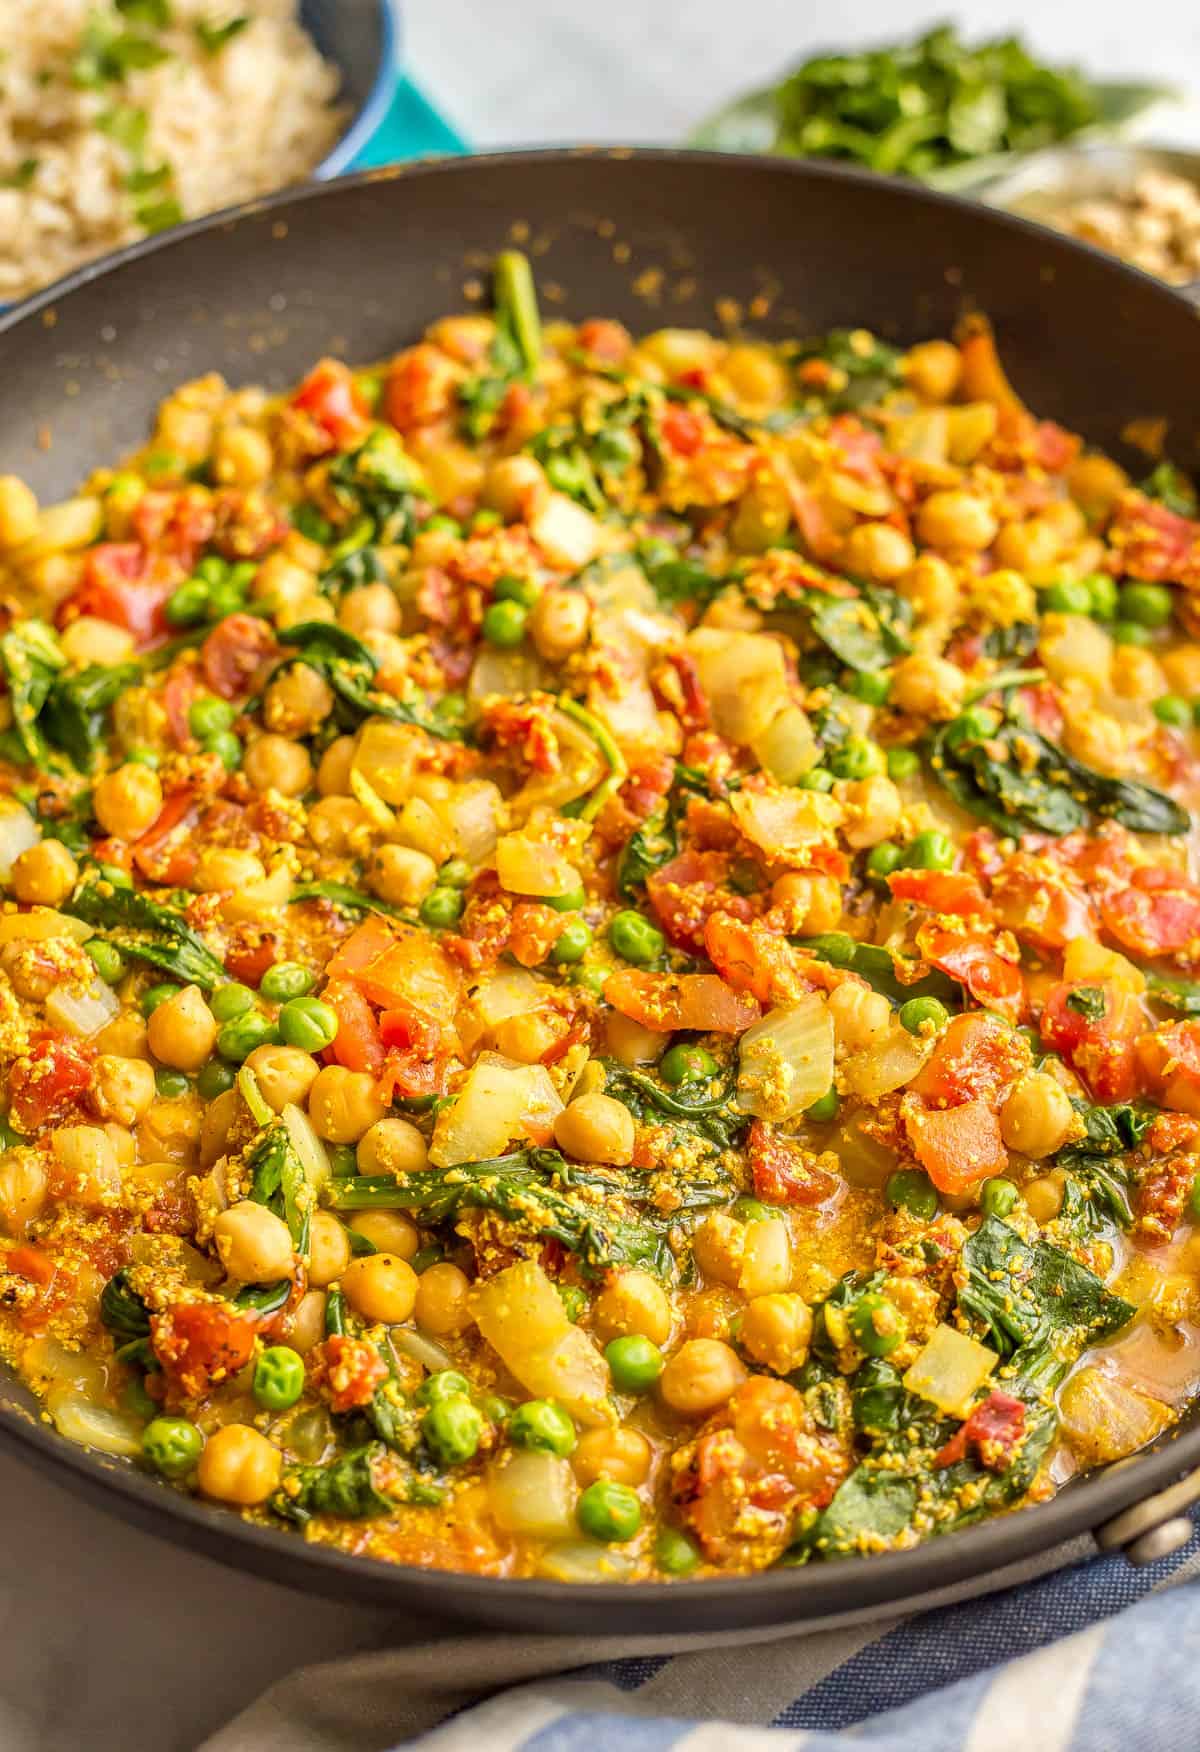 A vegetarian curry with chickpeas, peas, tomatoes and spinach in a large dark skillet.